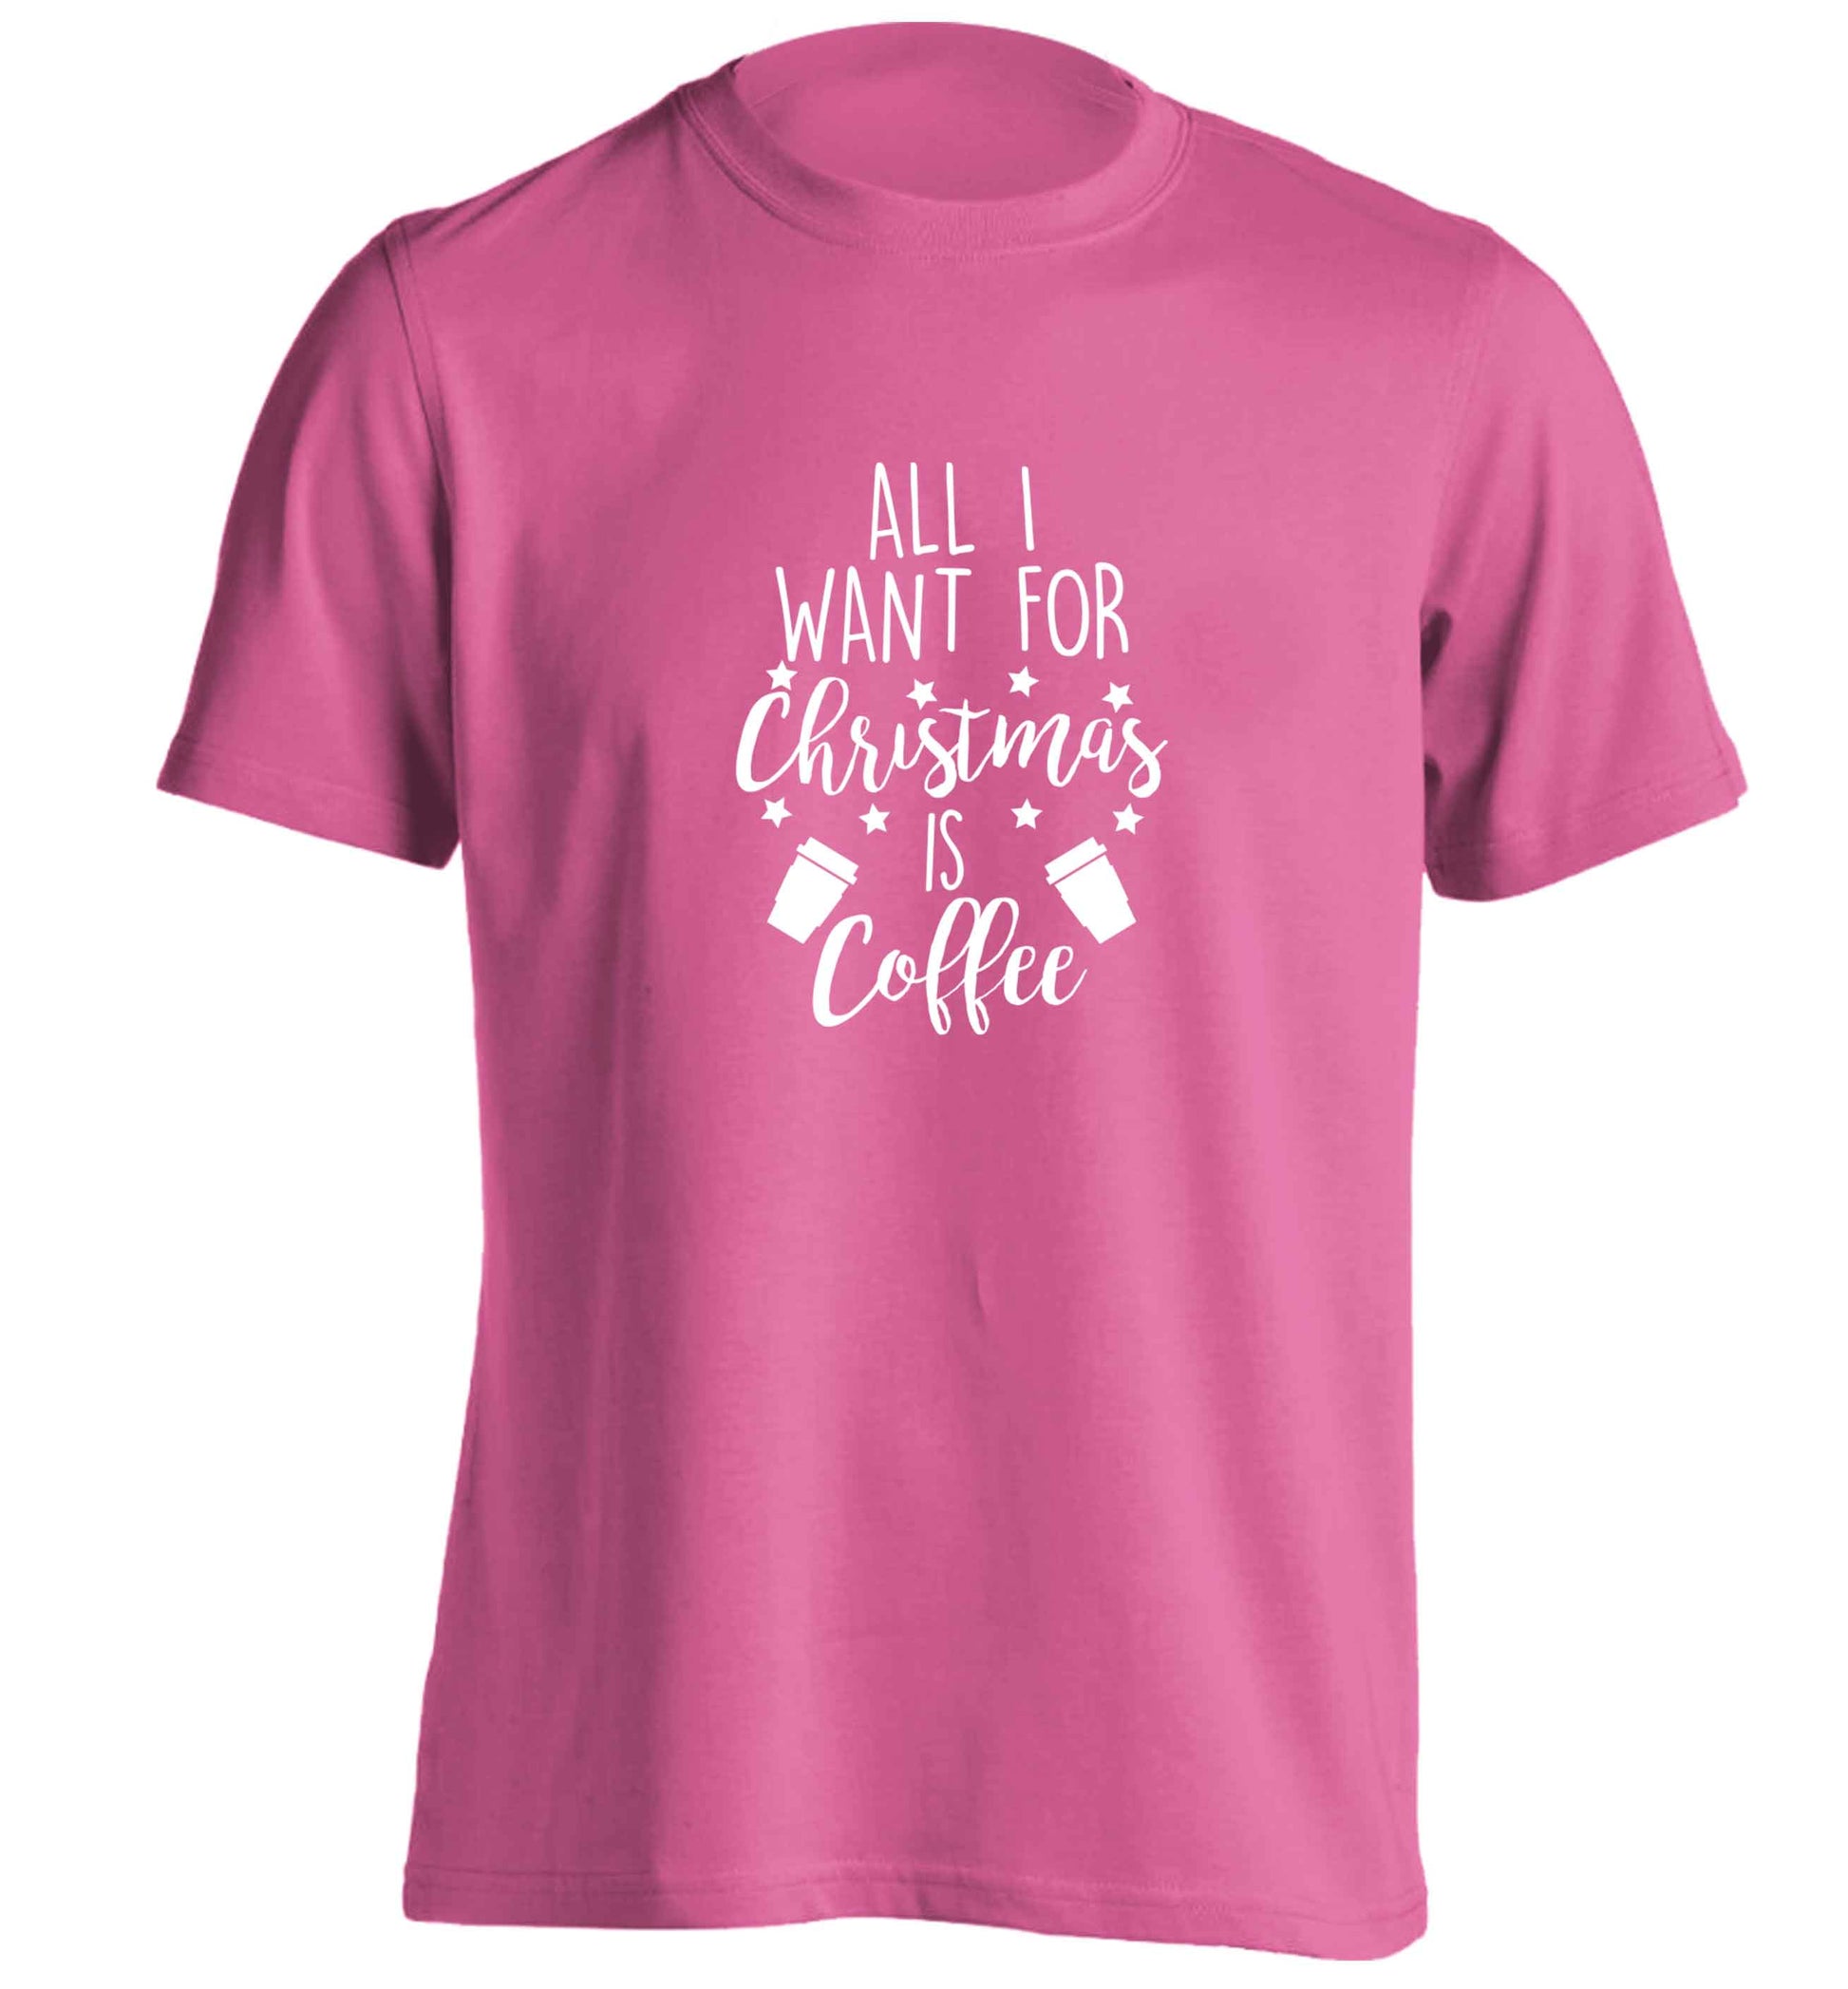 All I want for Christmas is coffee adults unisex pink Tshirt 2XL